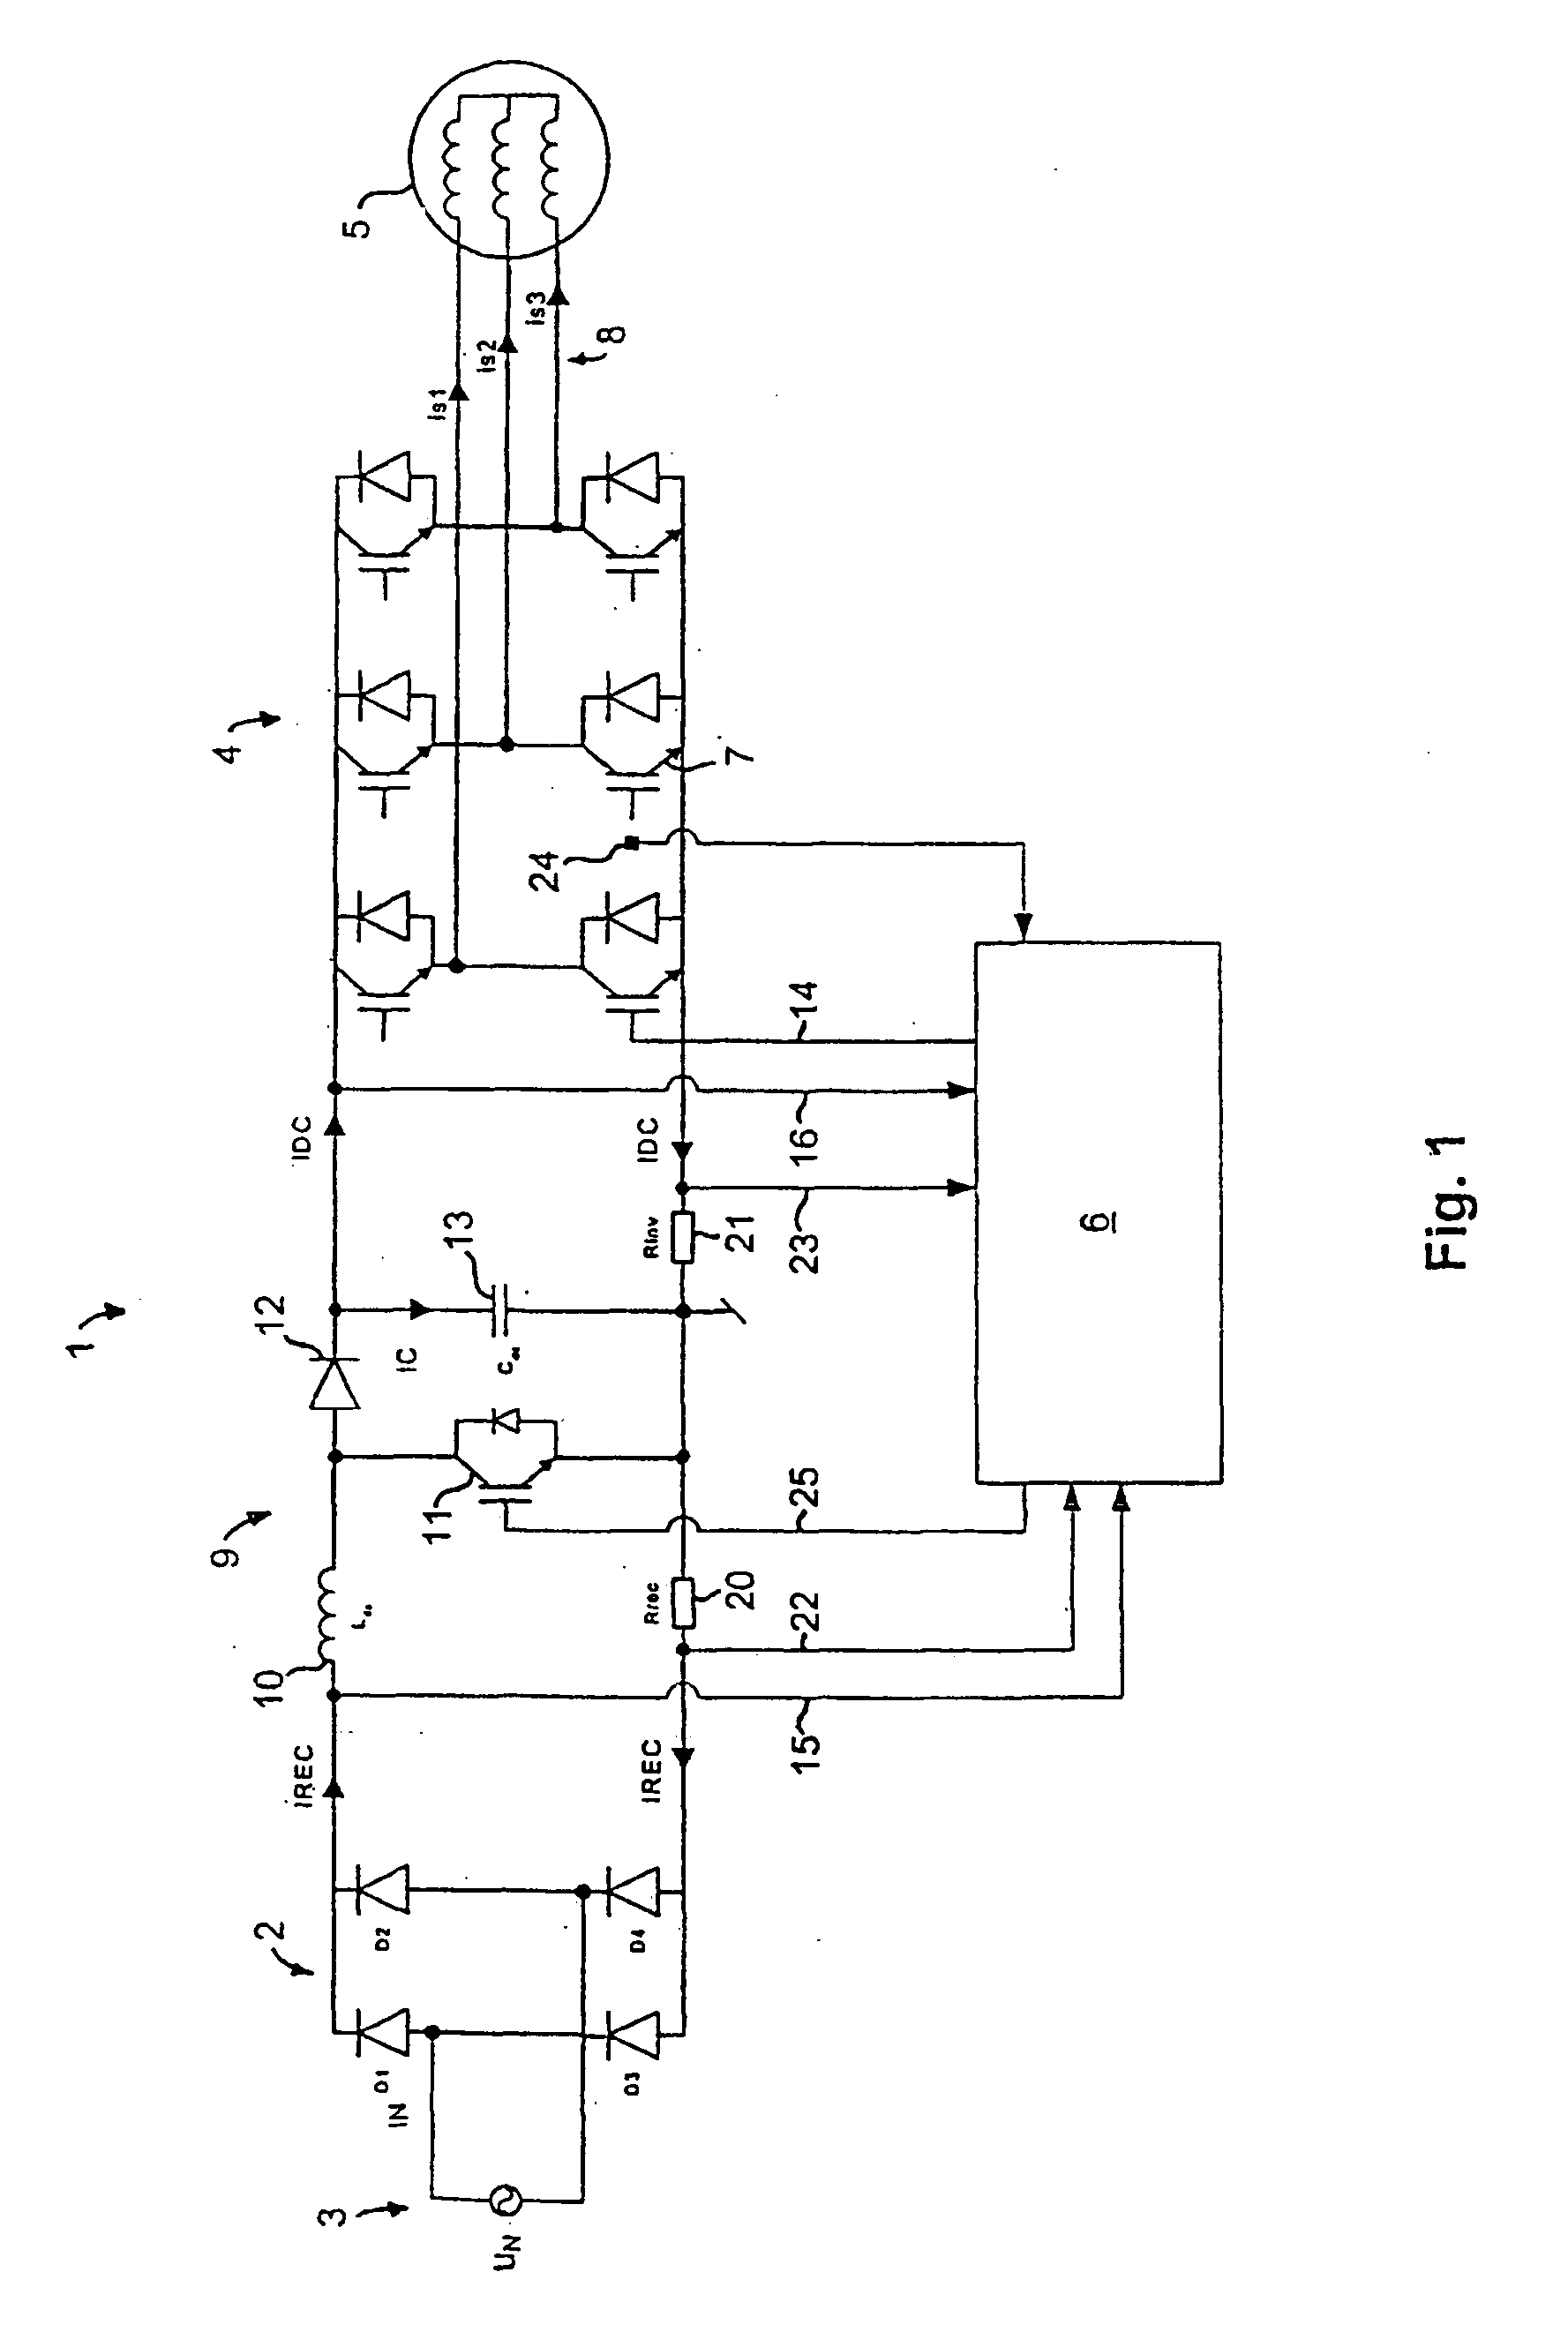 Frequency converter for different mains voltages